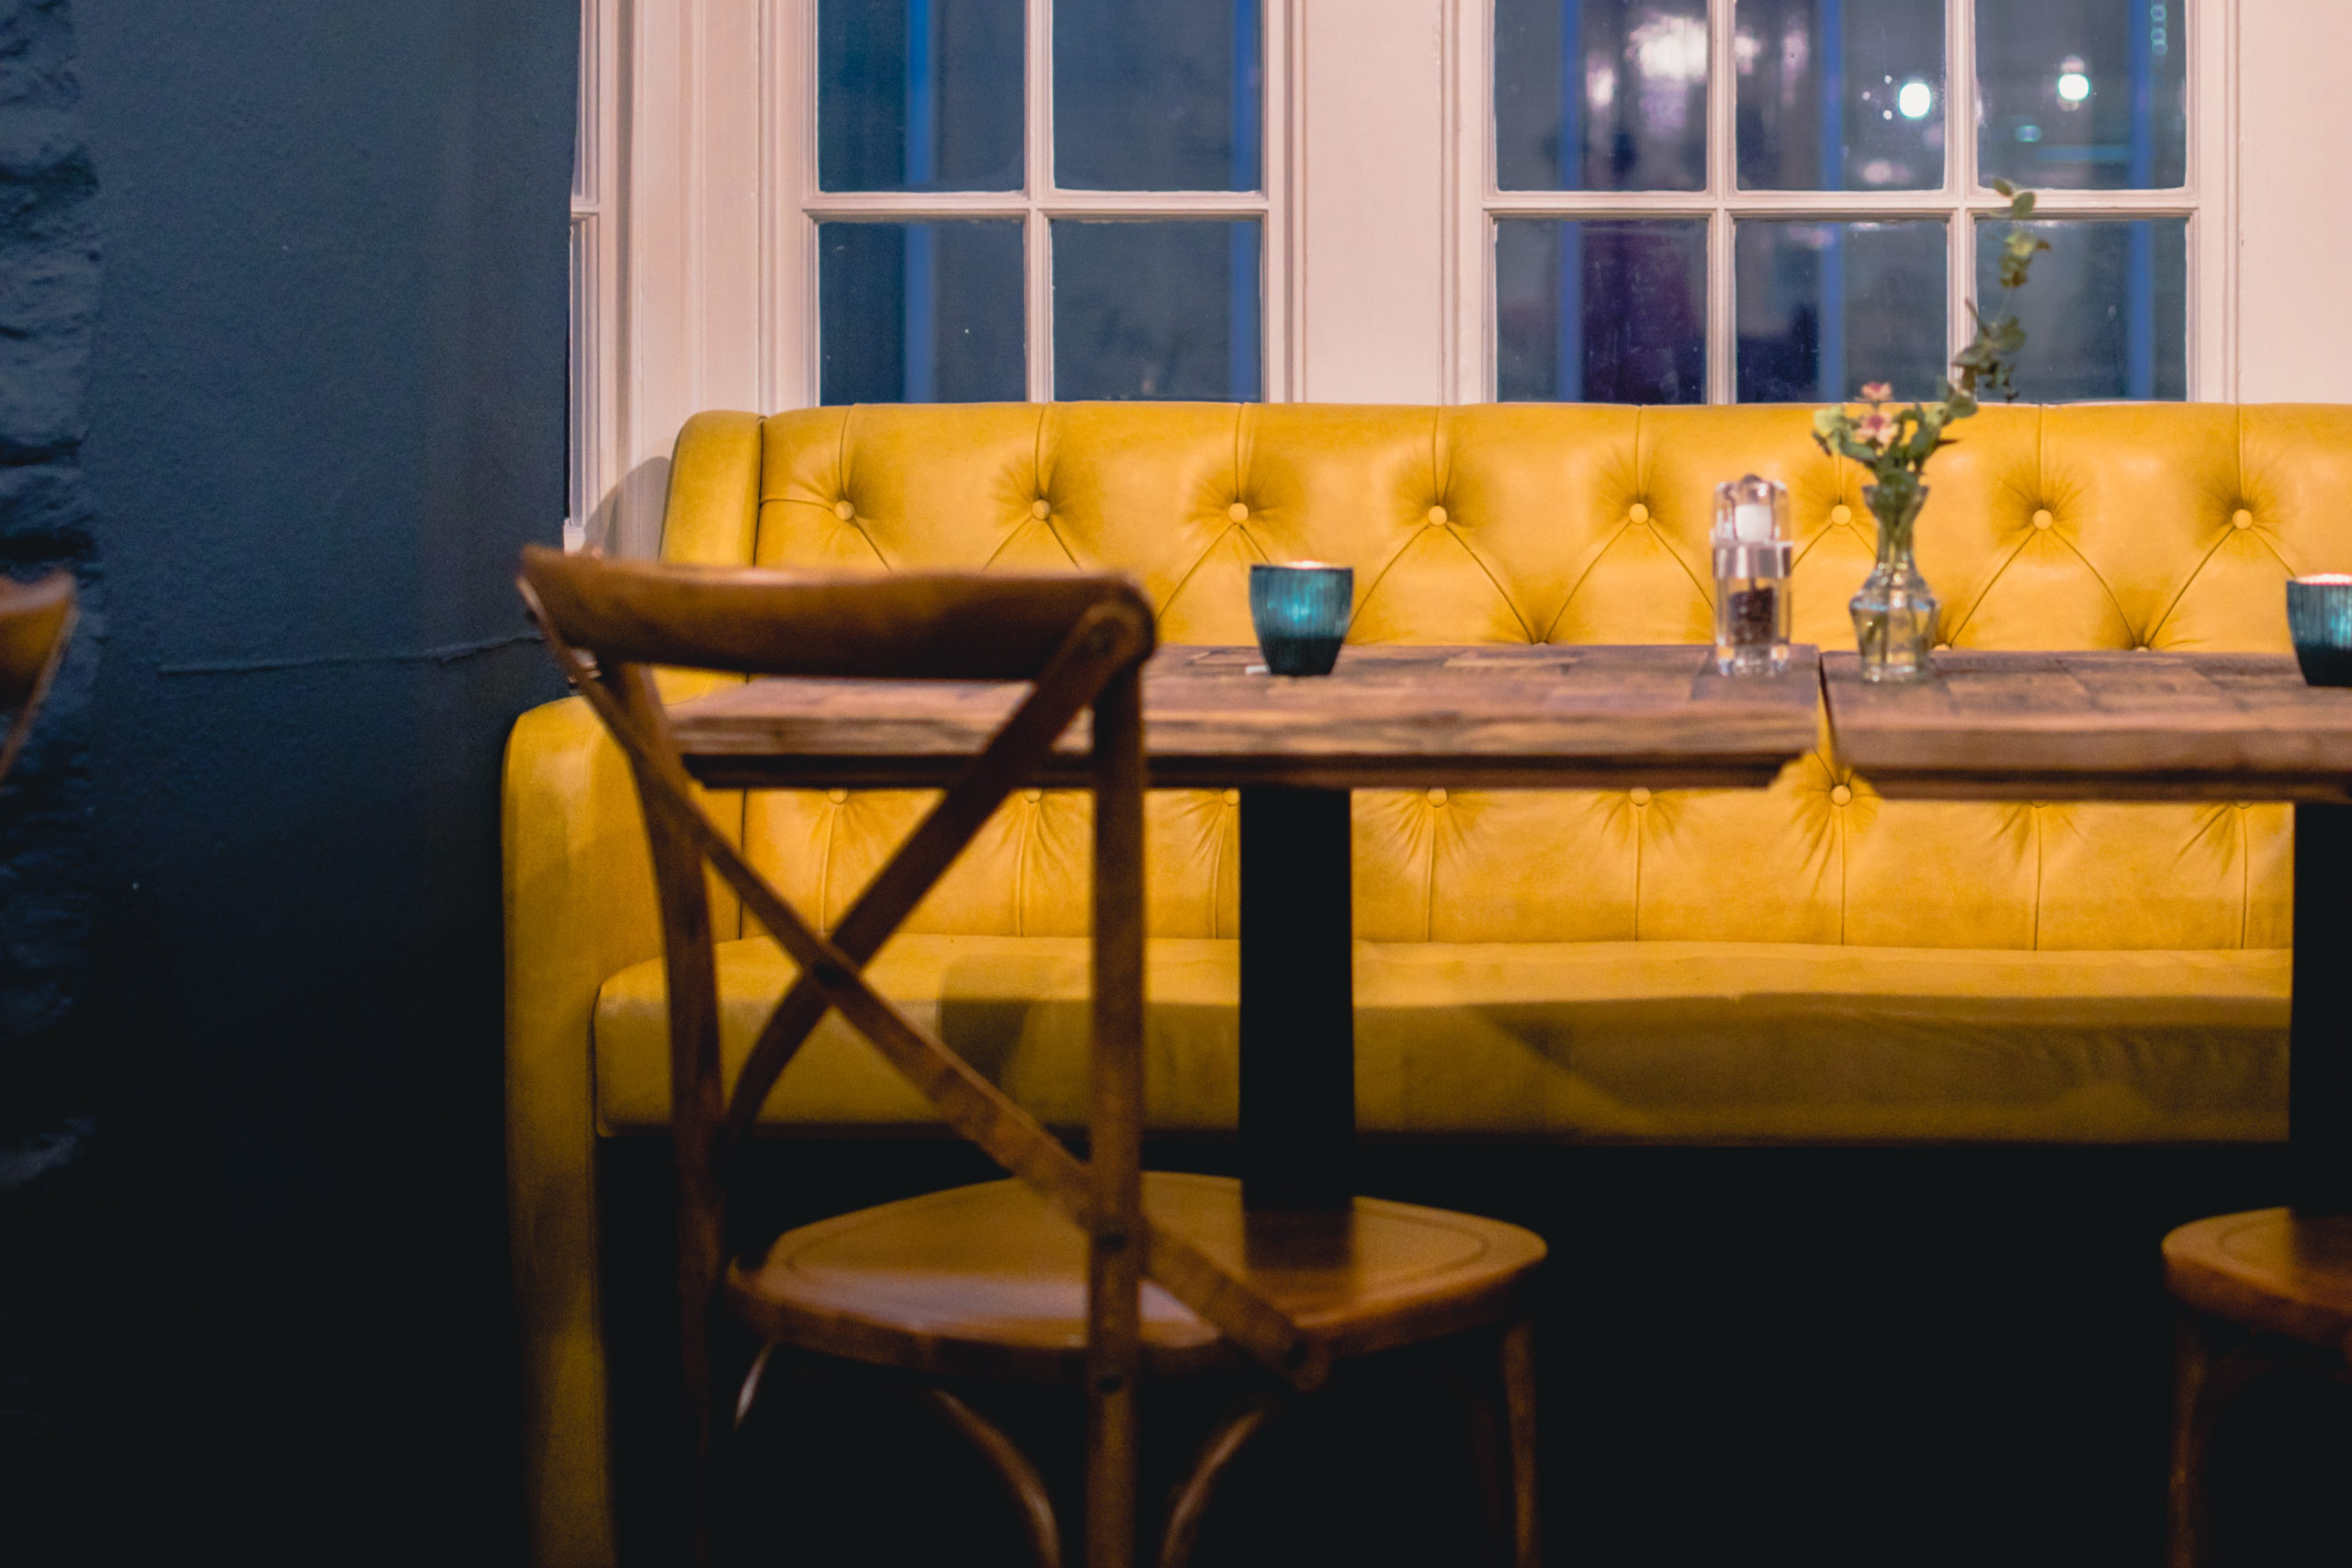 Bench Seating upholstered by Oswall and Rose in Yarwood Leather Mustang Mustard. Photography by Salt Media